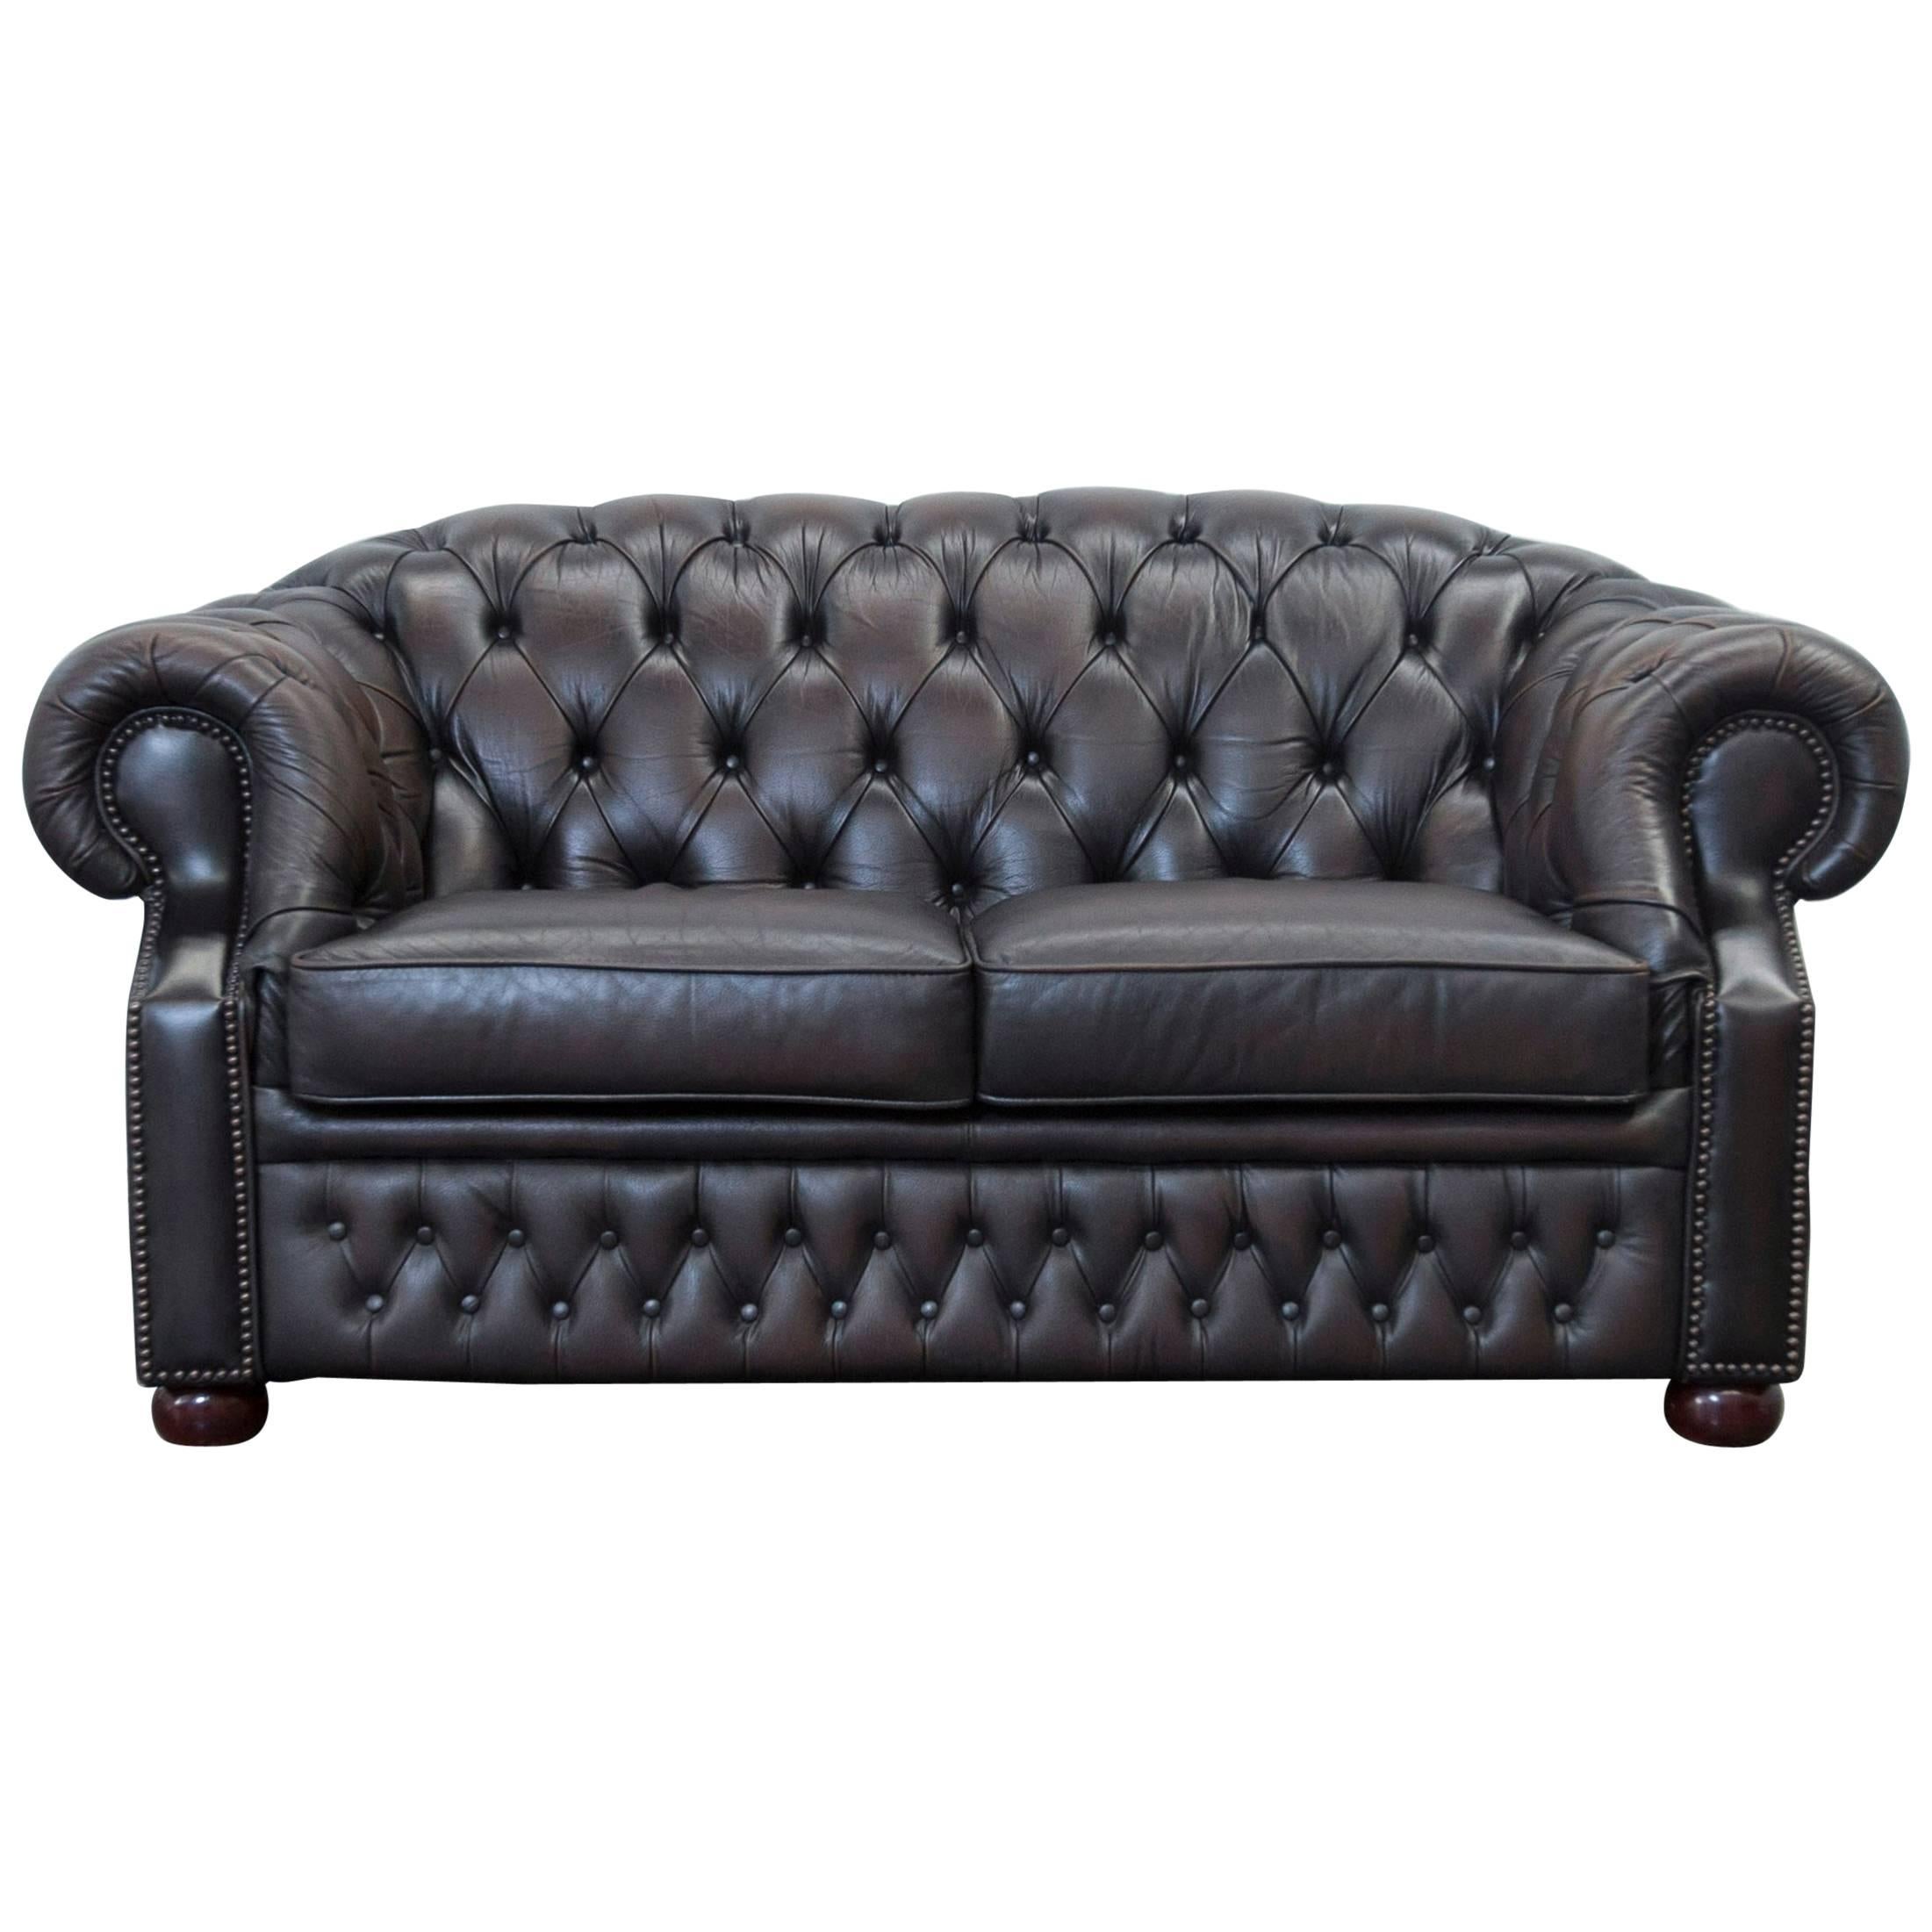 Centurion Chesterfield Leather Sofa Two-Seat Brown Vintage Modern